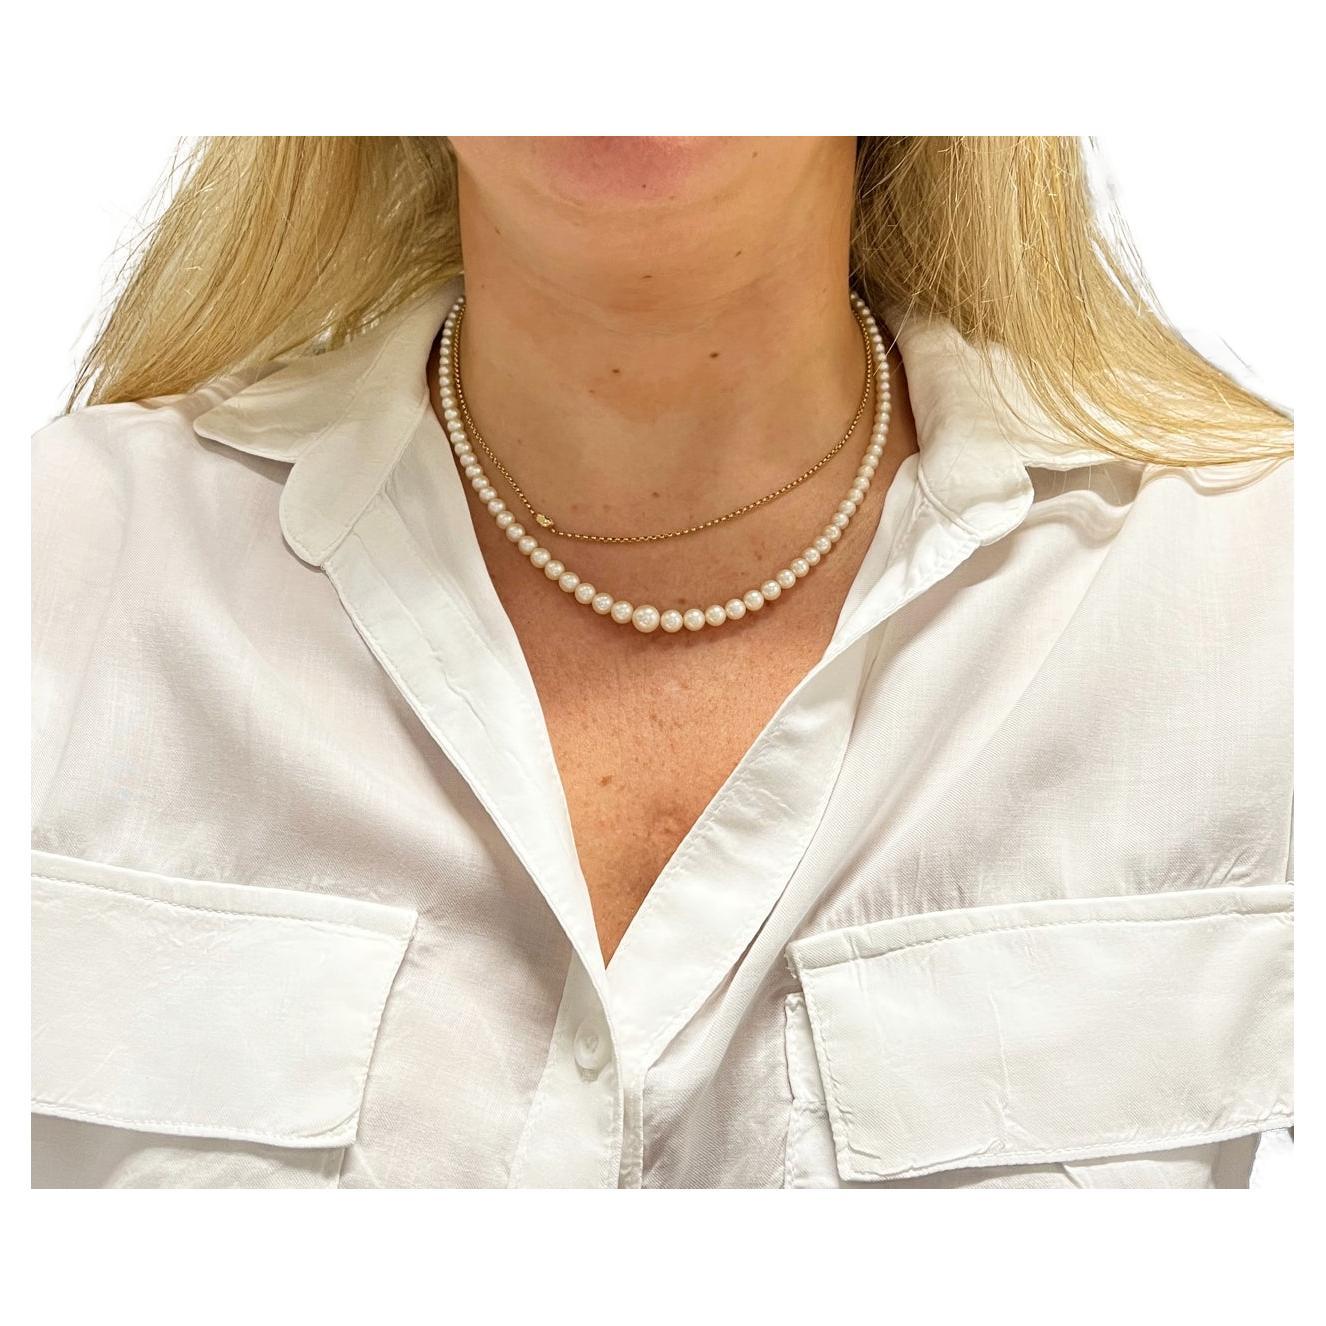 Mikimoto Vintage Cultured Pearl Graduated Necklace Sterling Silver Clasp
Metal: Sterling silver 925
Pearls: Graduated cultured pearls 3.5 - 7mm, white, medium luster 
Length: 17 inches
Note: Box included, slight movement between pearls on string